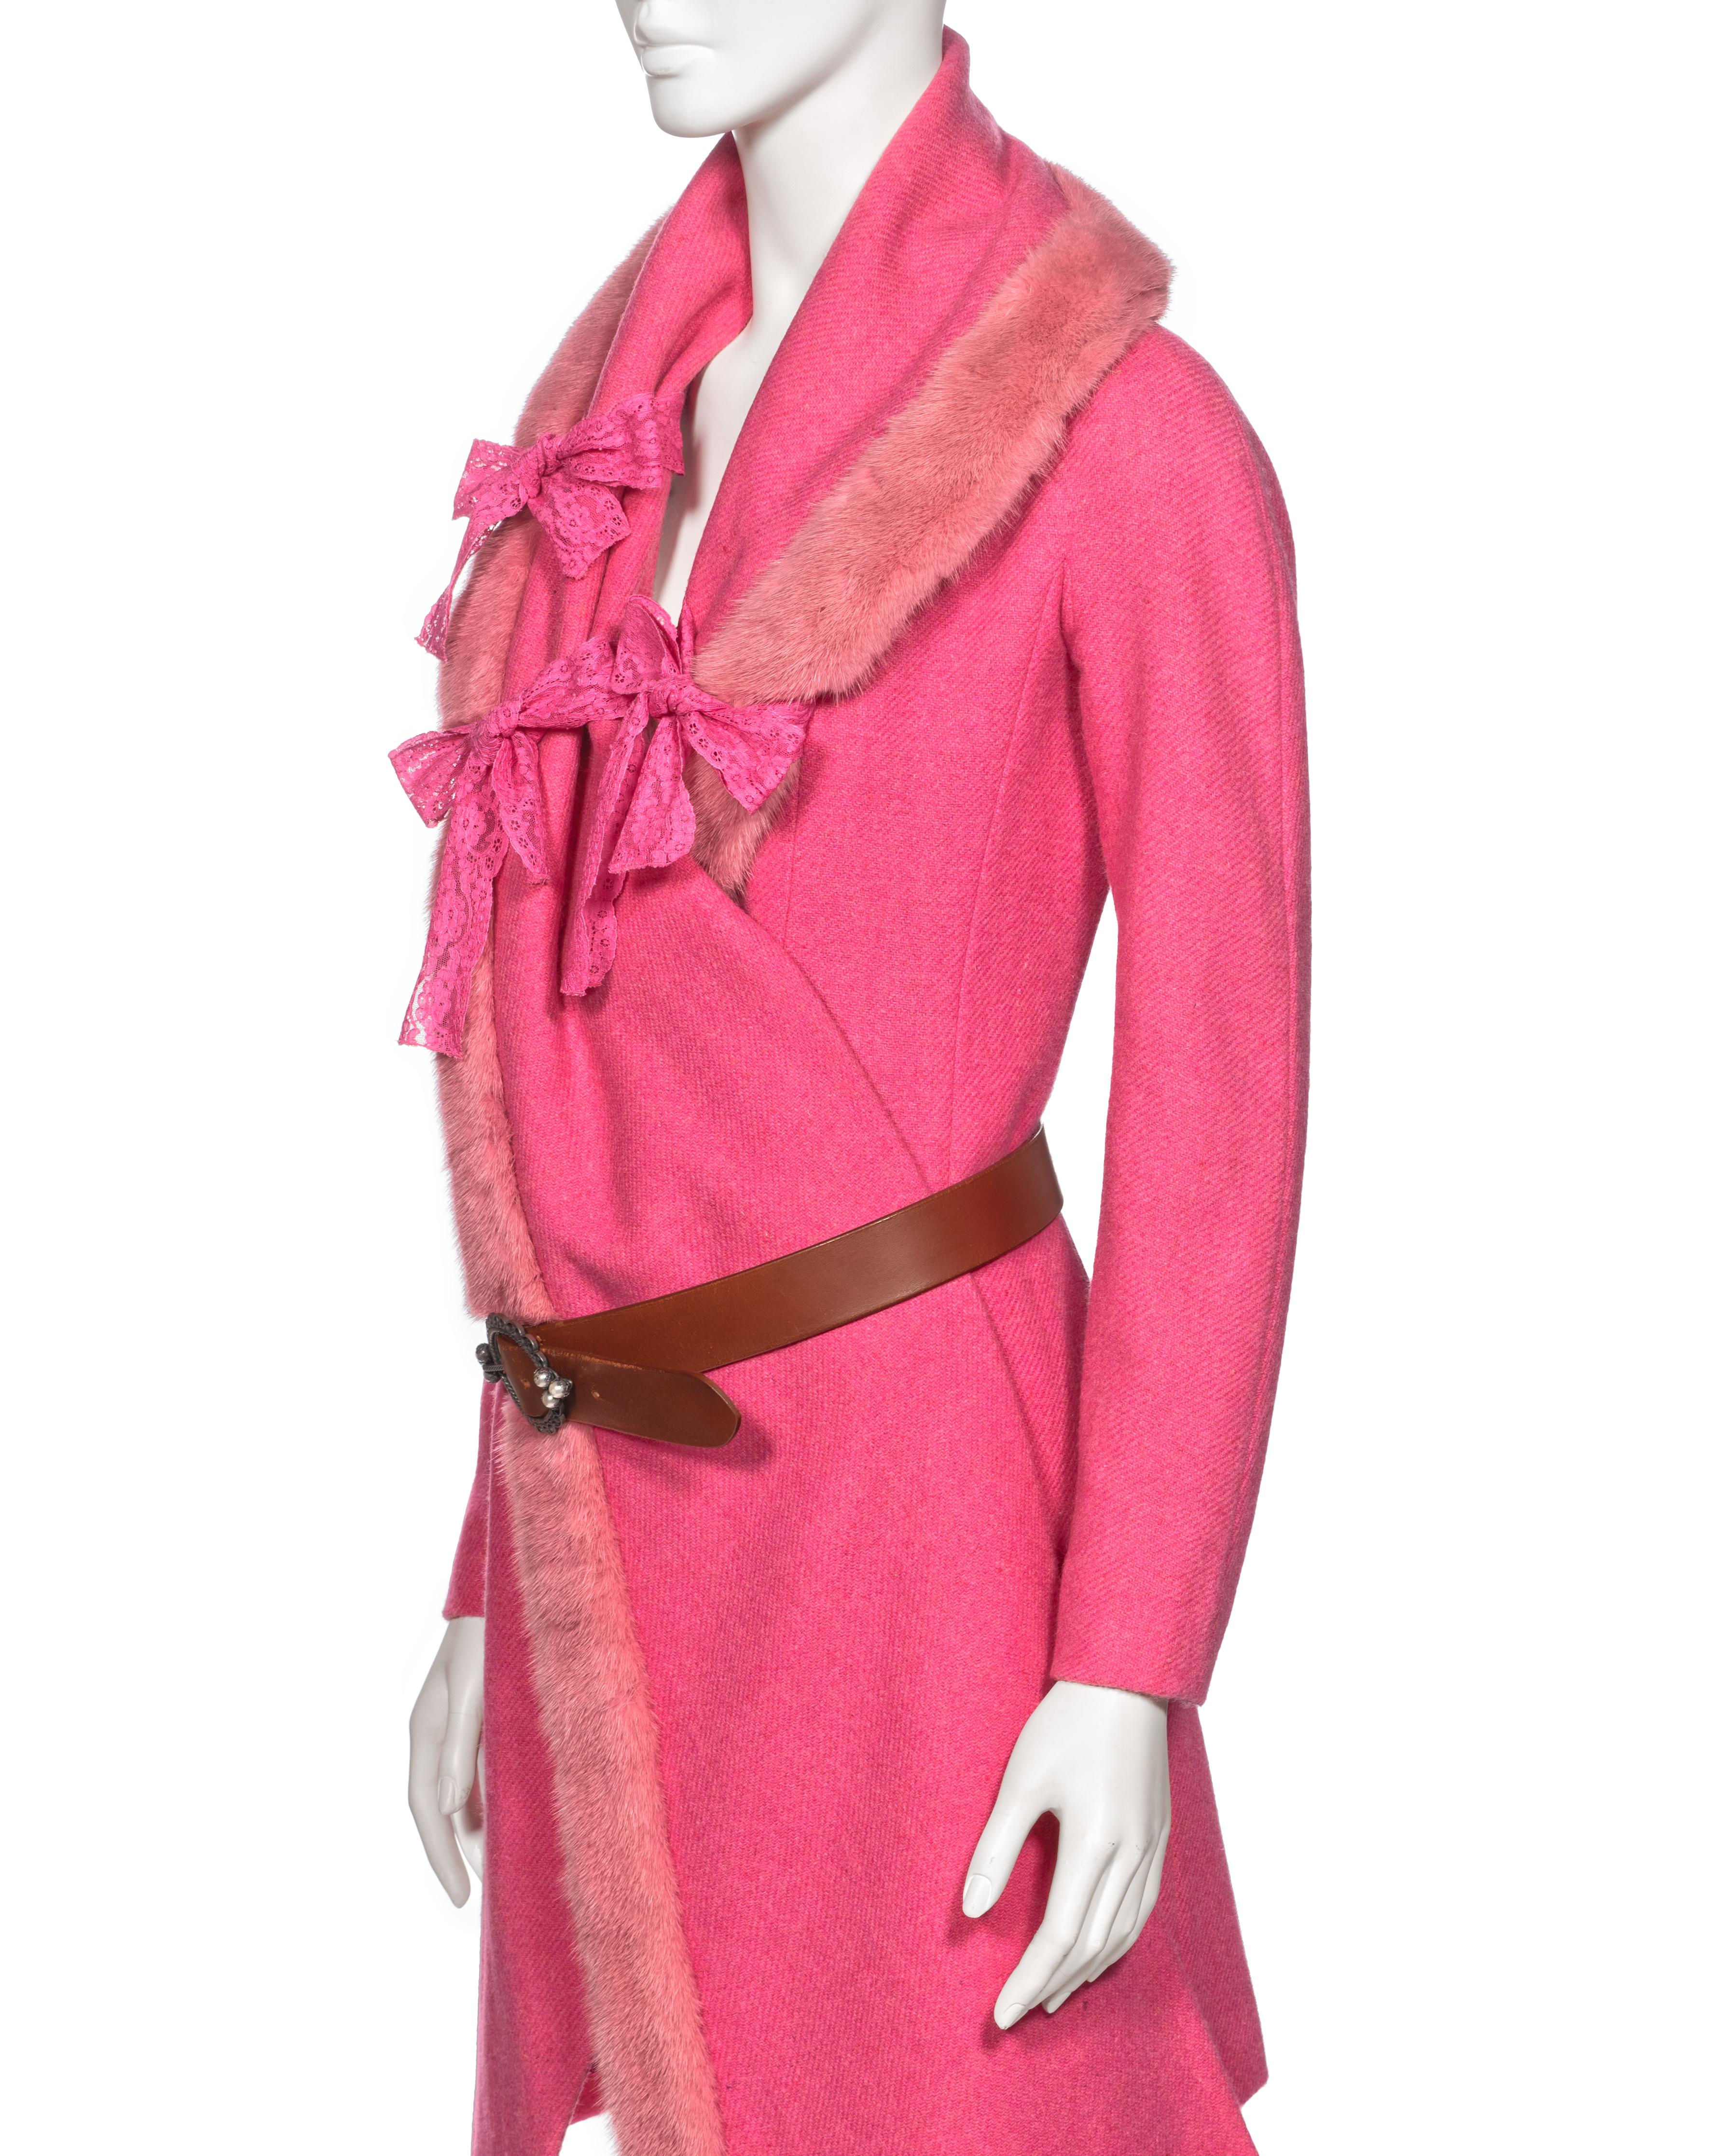 Christian Dior by John Galliano Pink Tweed Coat With Mink Fur Collar, fw 1998 For Sale 7